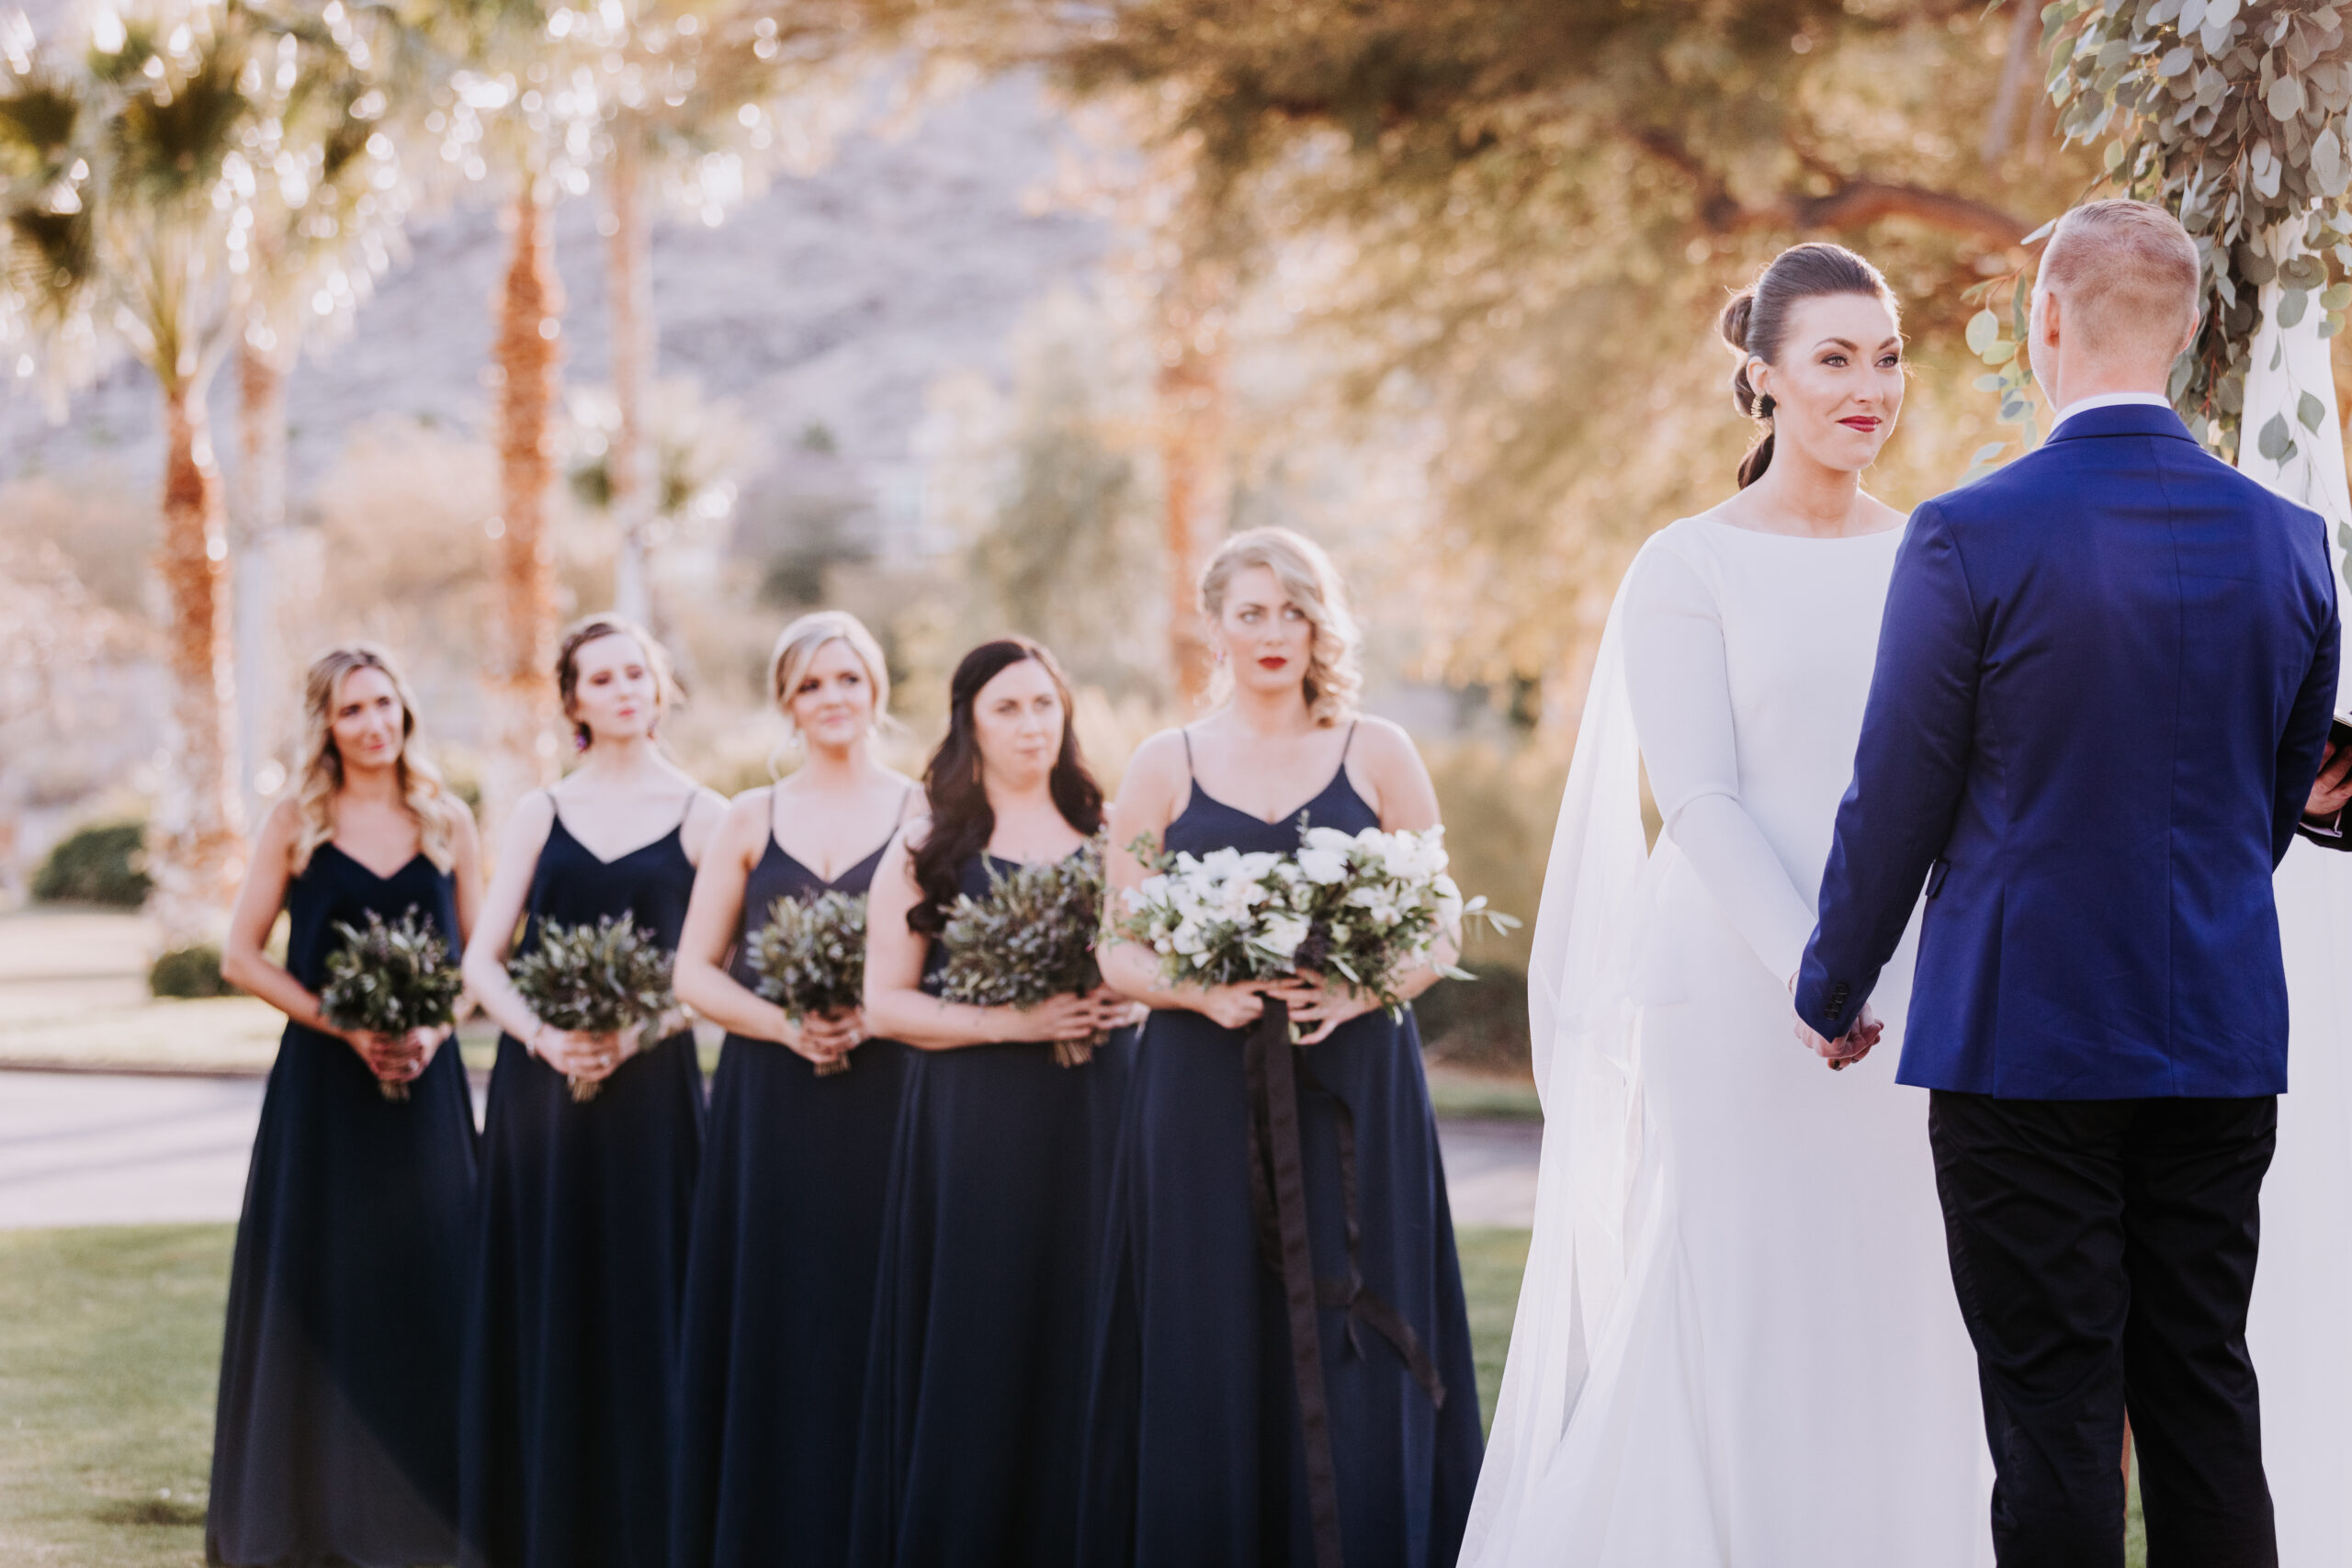 A bride listens to her groom's vows as several bridesmaids dressed in navy look on.